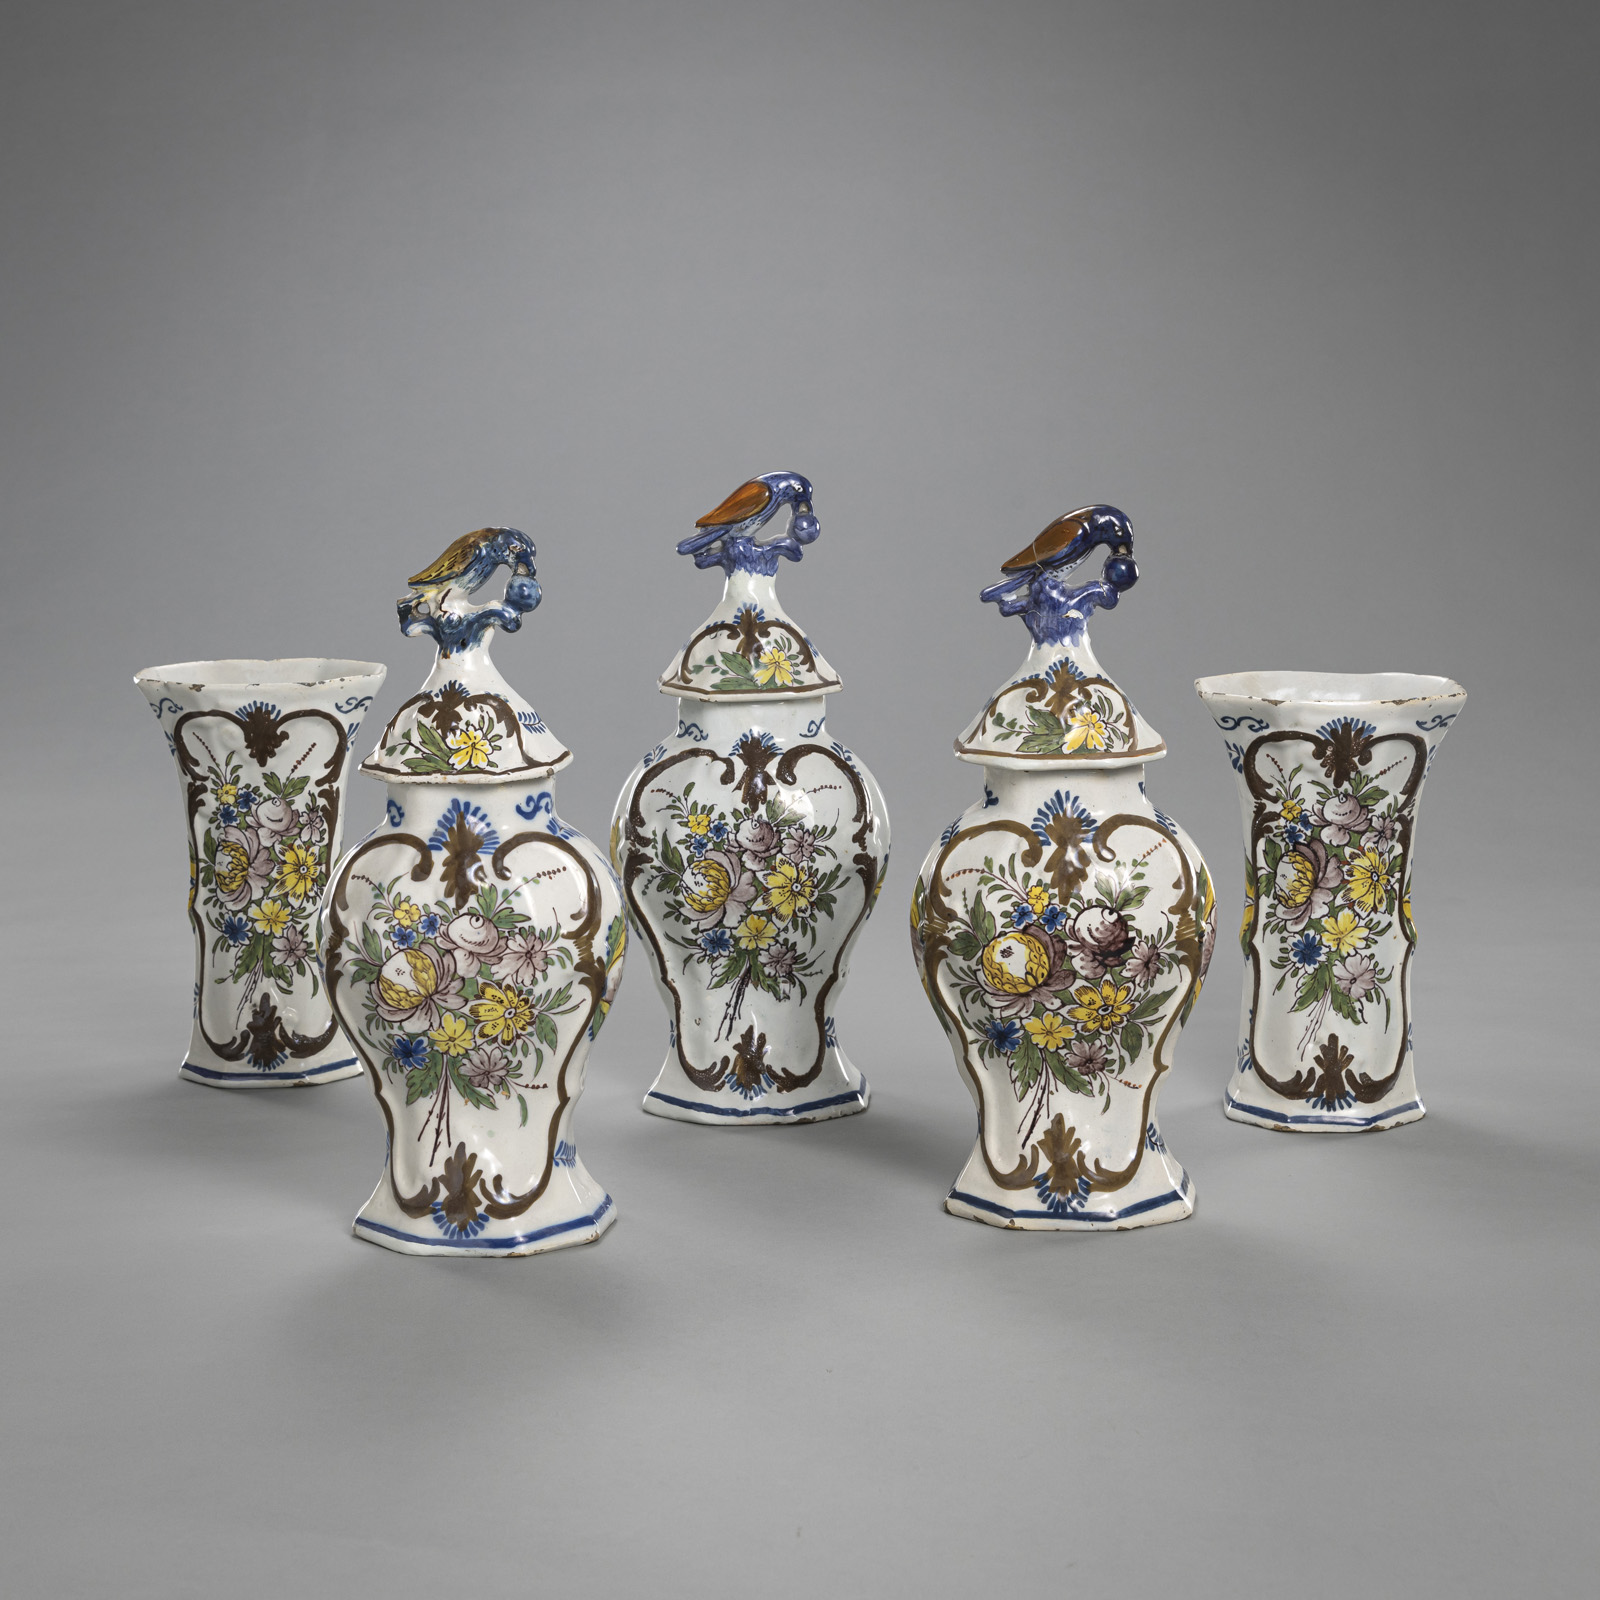 A SET OF 5 DELFT FAIENCE VASES